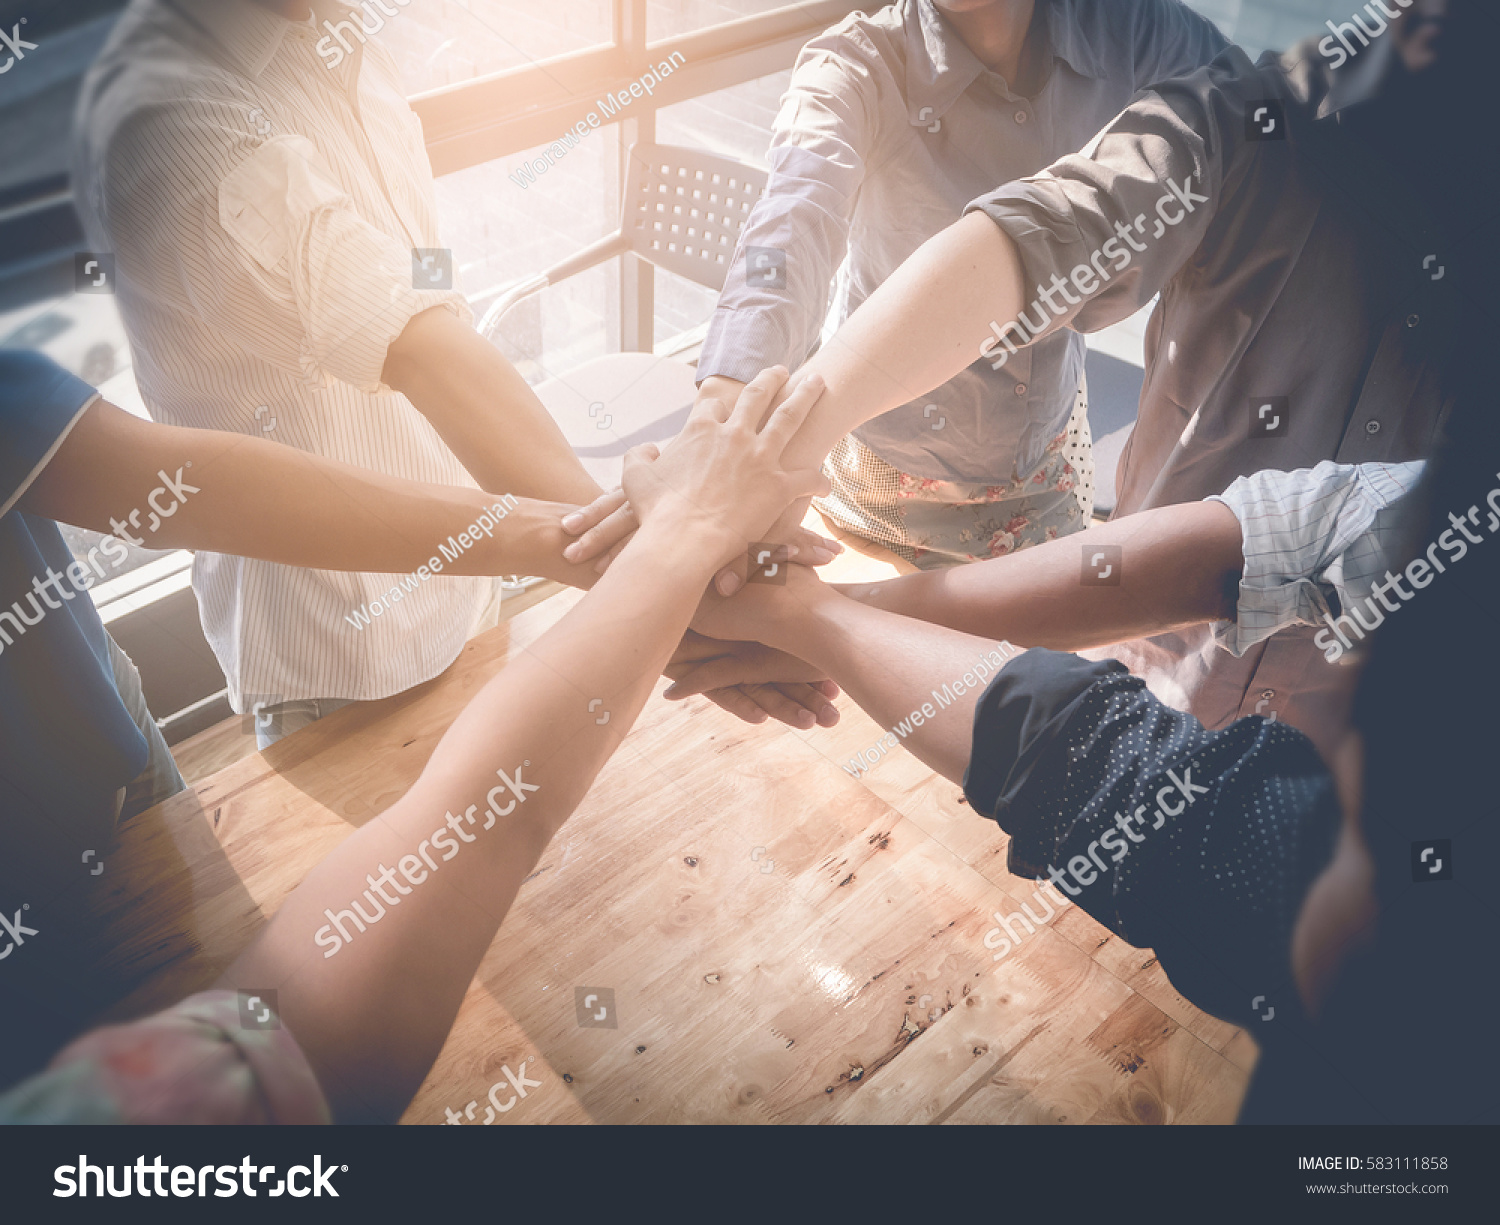 Group of Business people putting their hands working together on wooden background in office. group support teamwork cooperation concept. #583111858